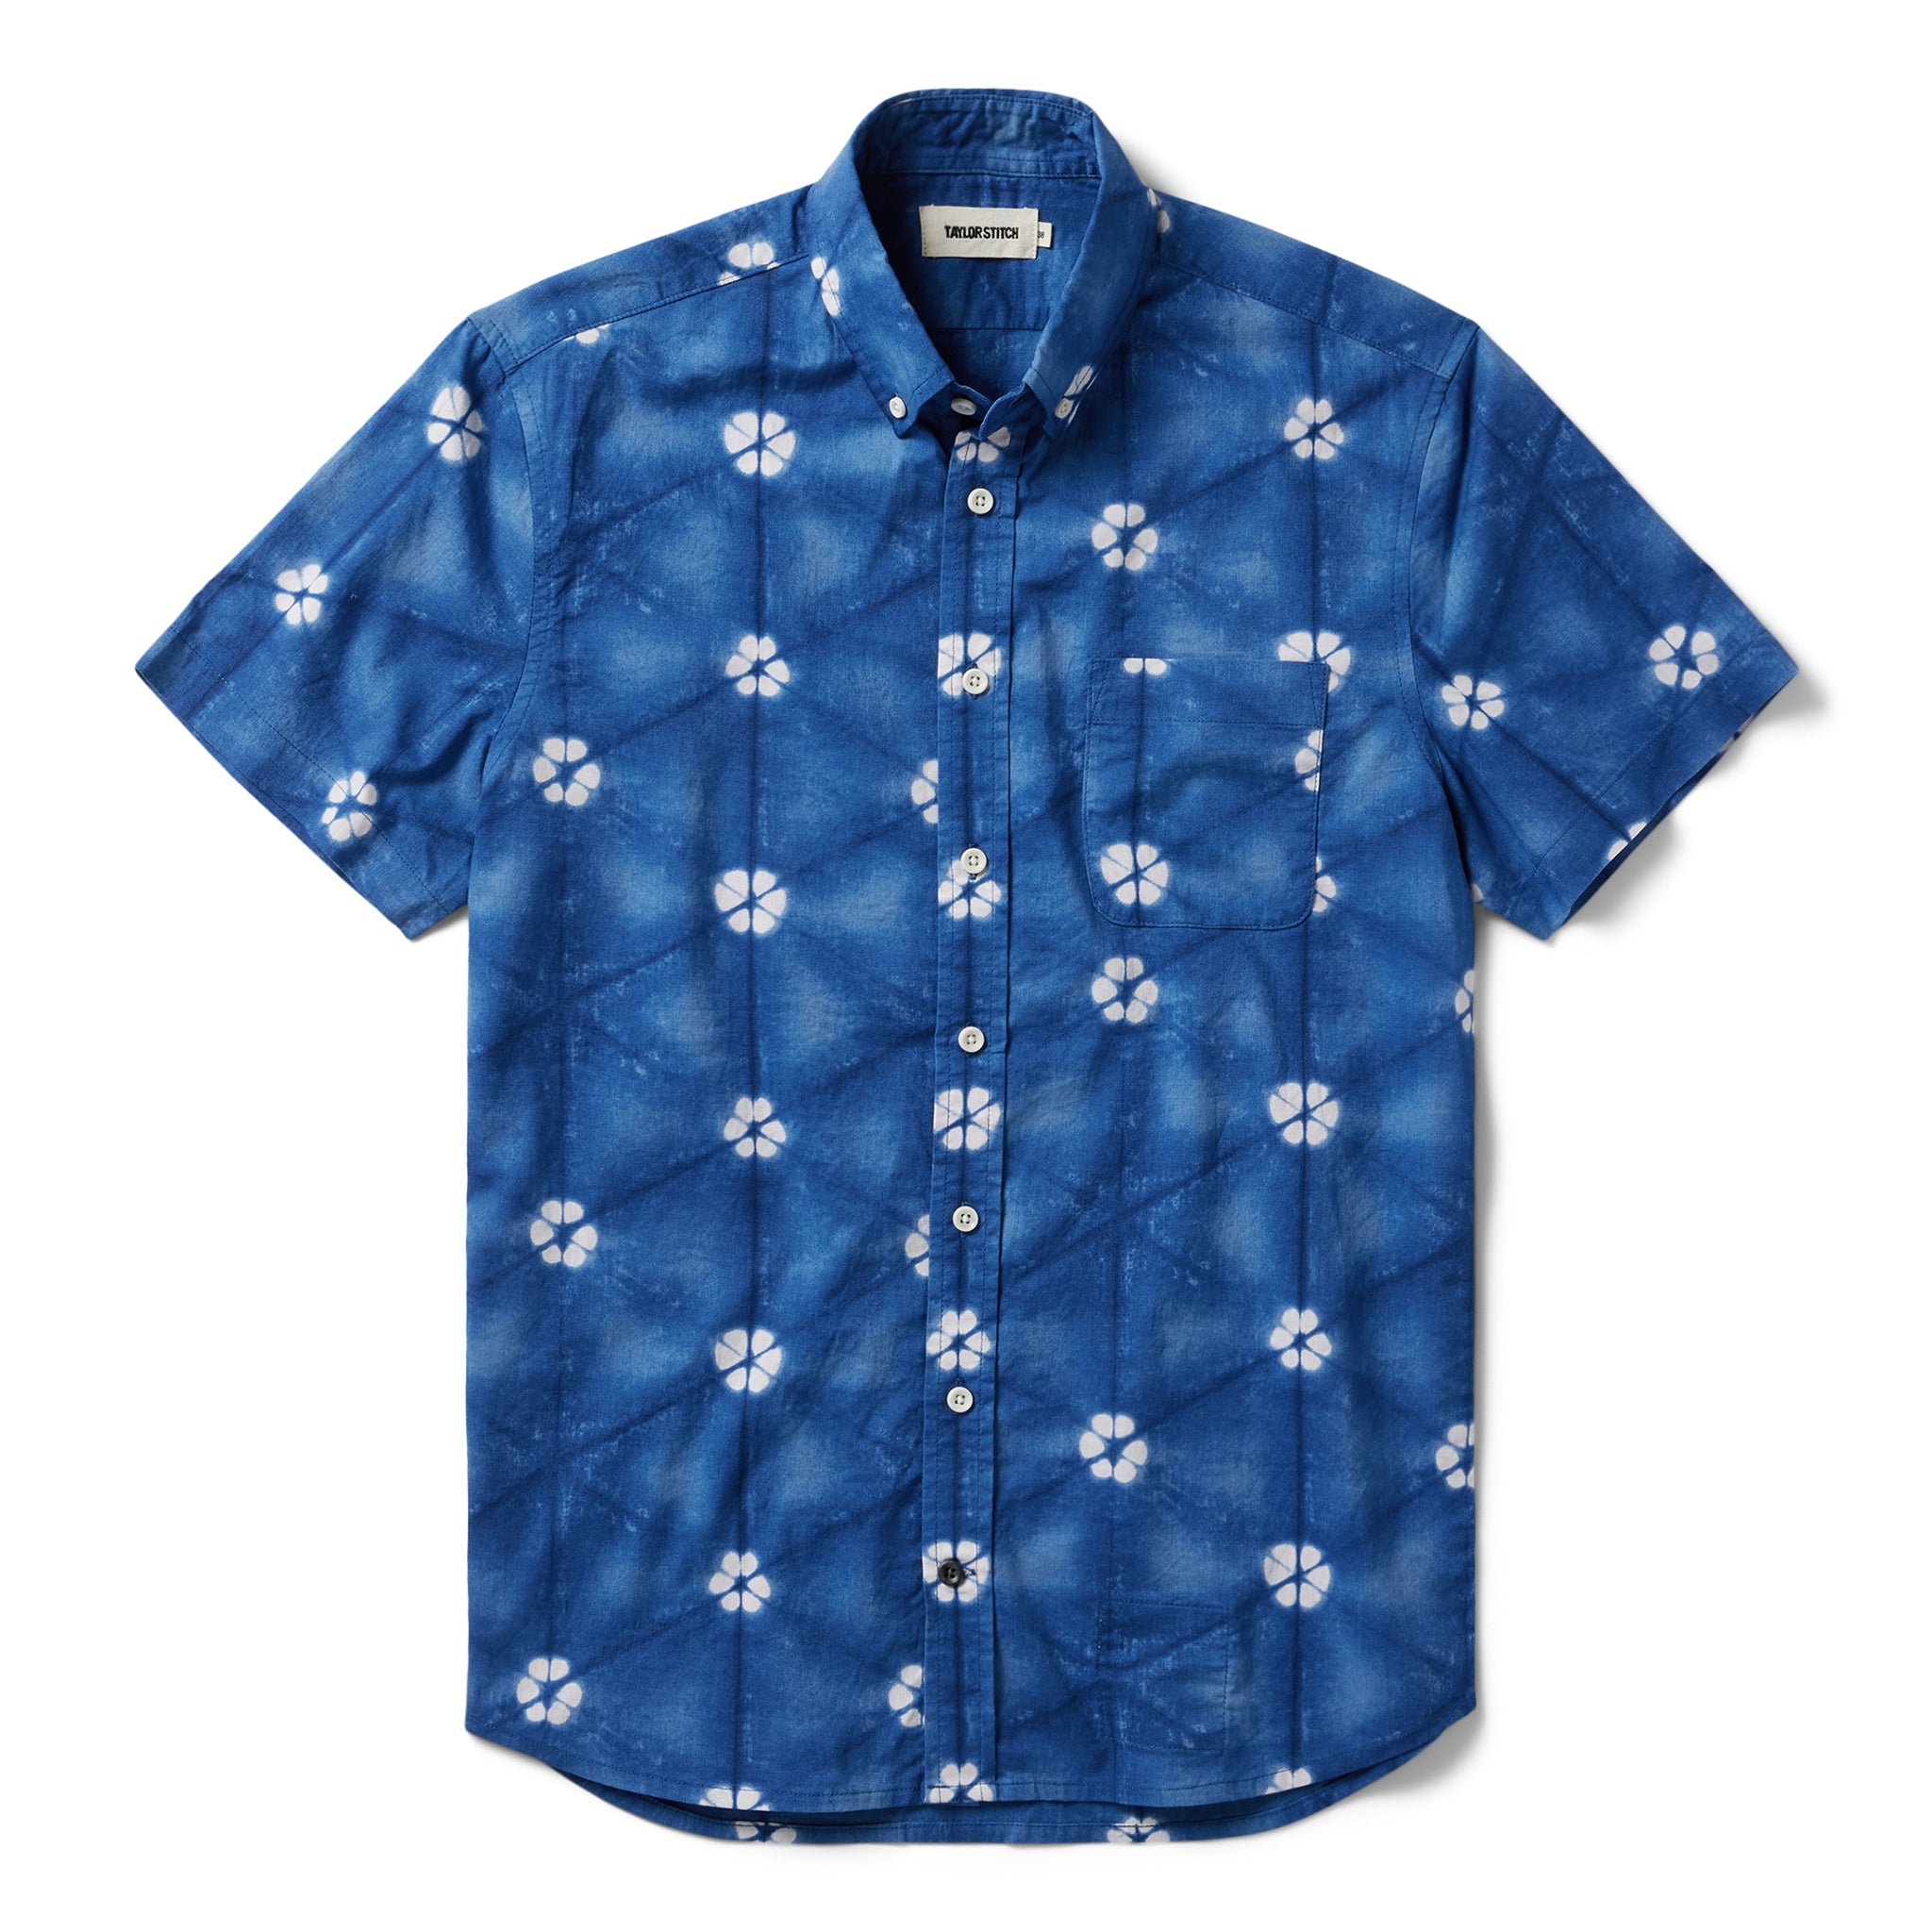 The Short Sleeve Jack in Deep Navy Floral